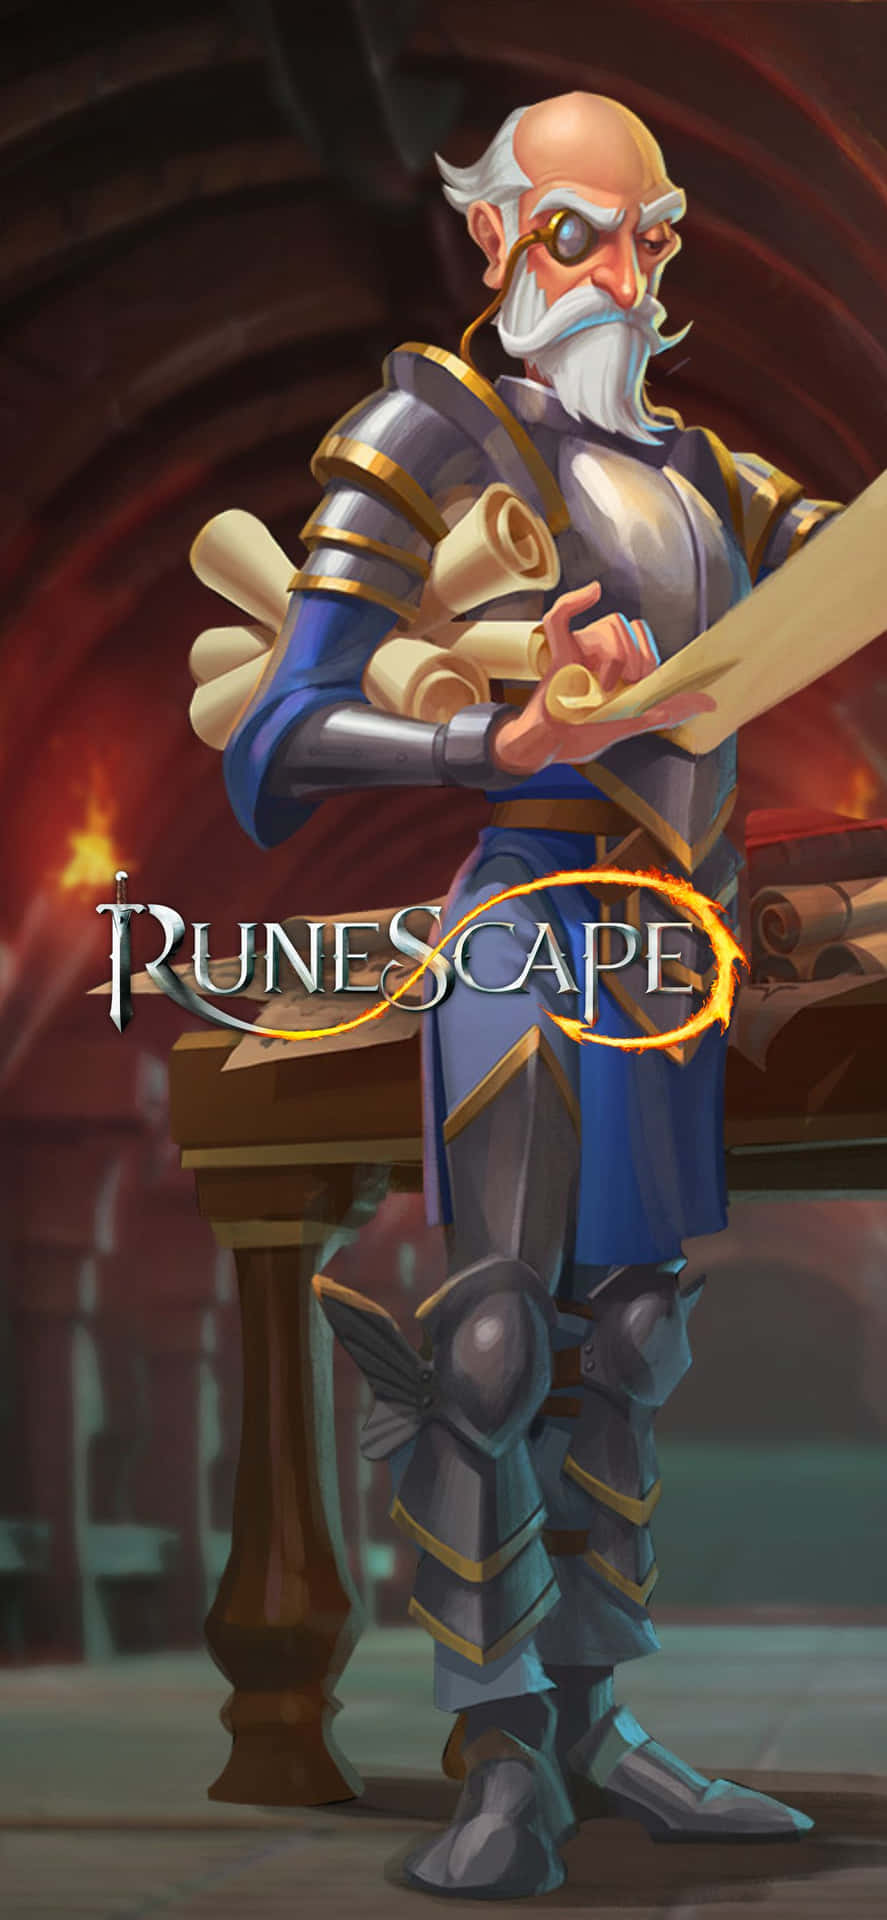 Explore the World of Runescape with the Iphone Xs Max